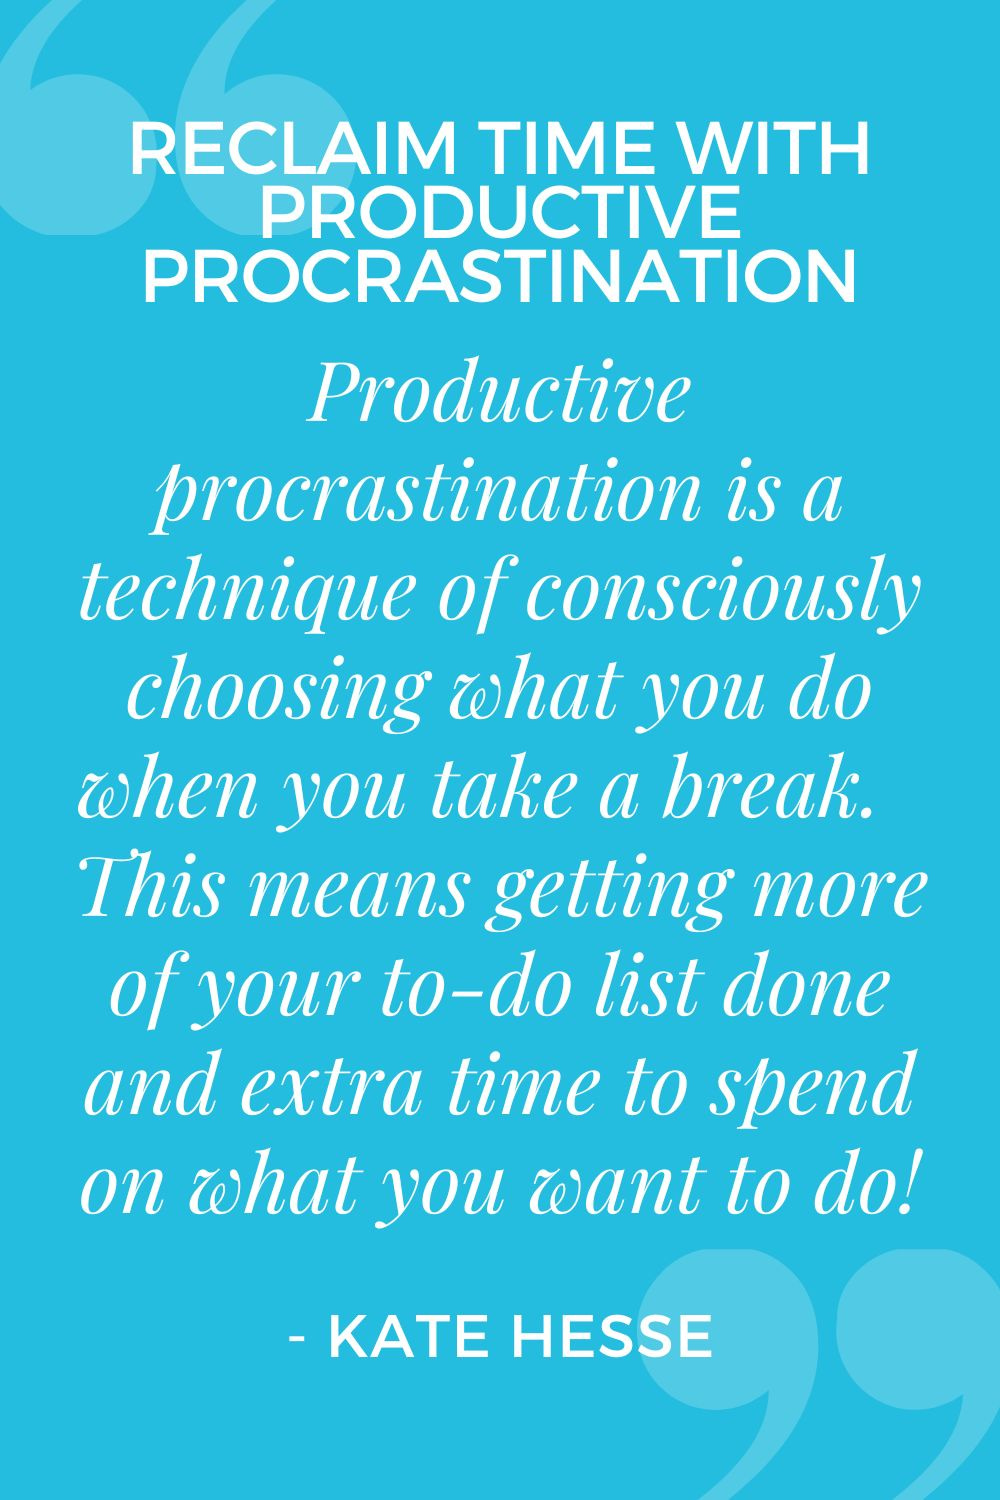 Productive procrastination is a technique of consciously choosing what you do when you take a break. This means getting more of your to-do list done and extra time to spend on what you want to do!